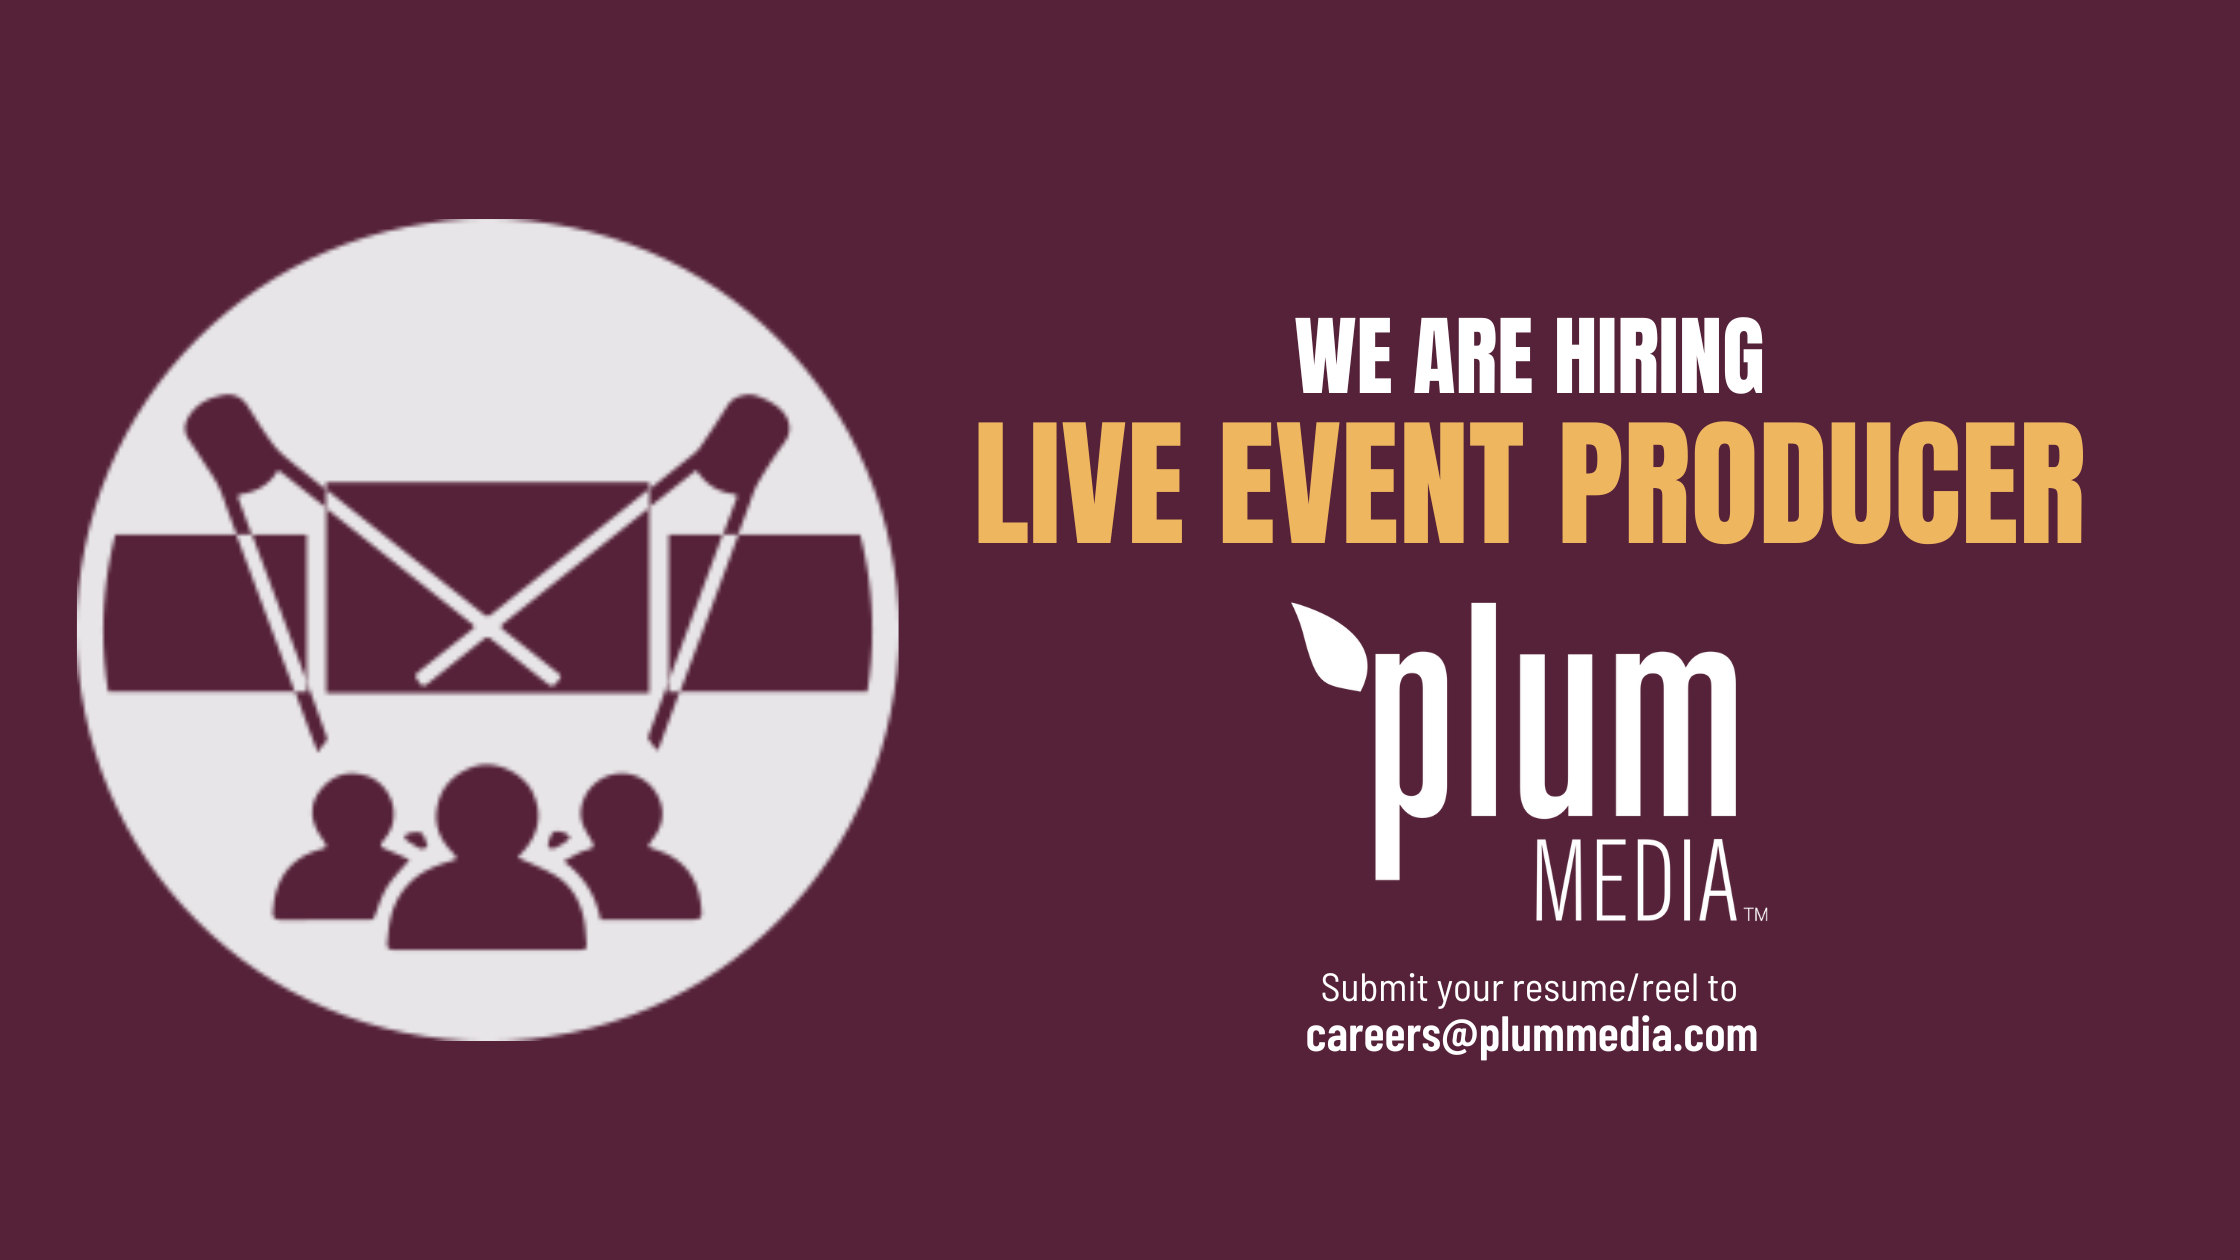 Now Hiring, Live Event Producer